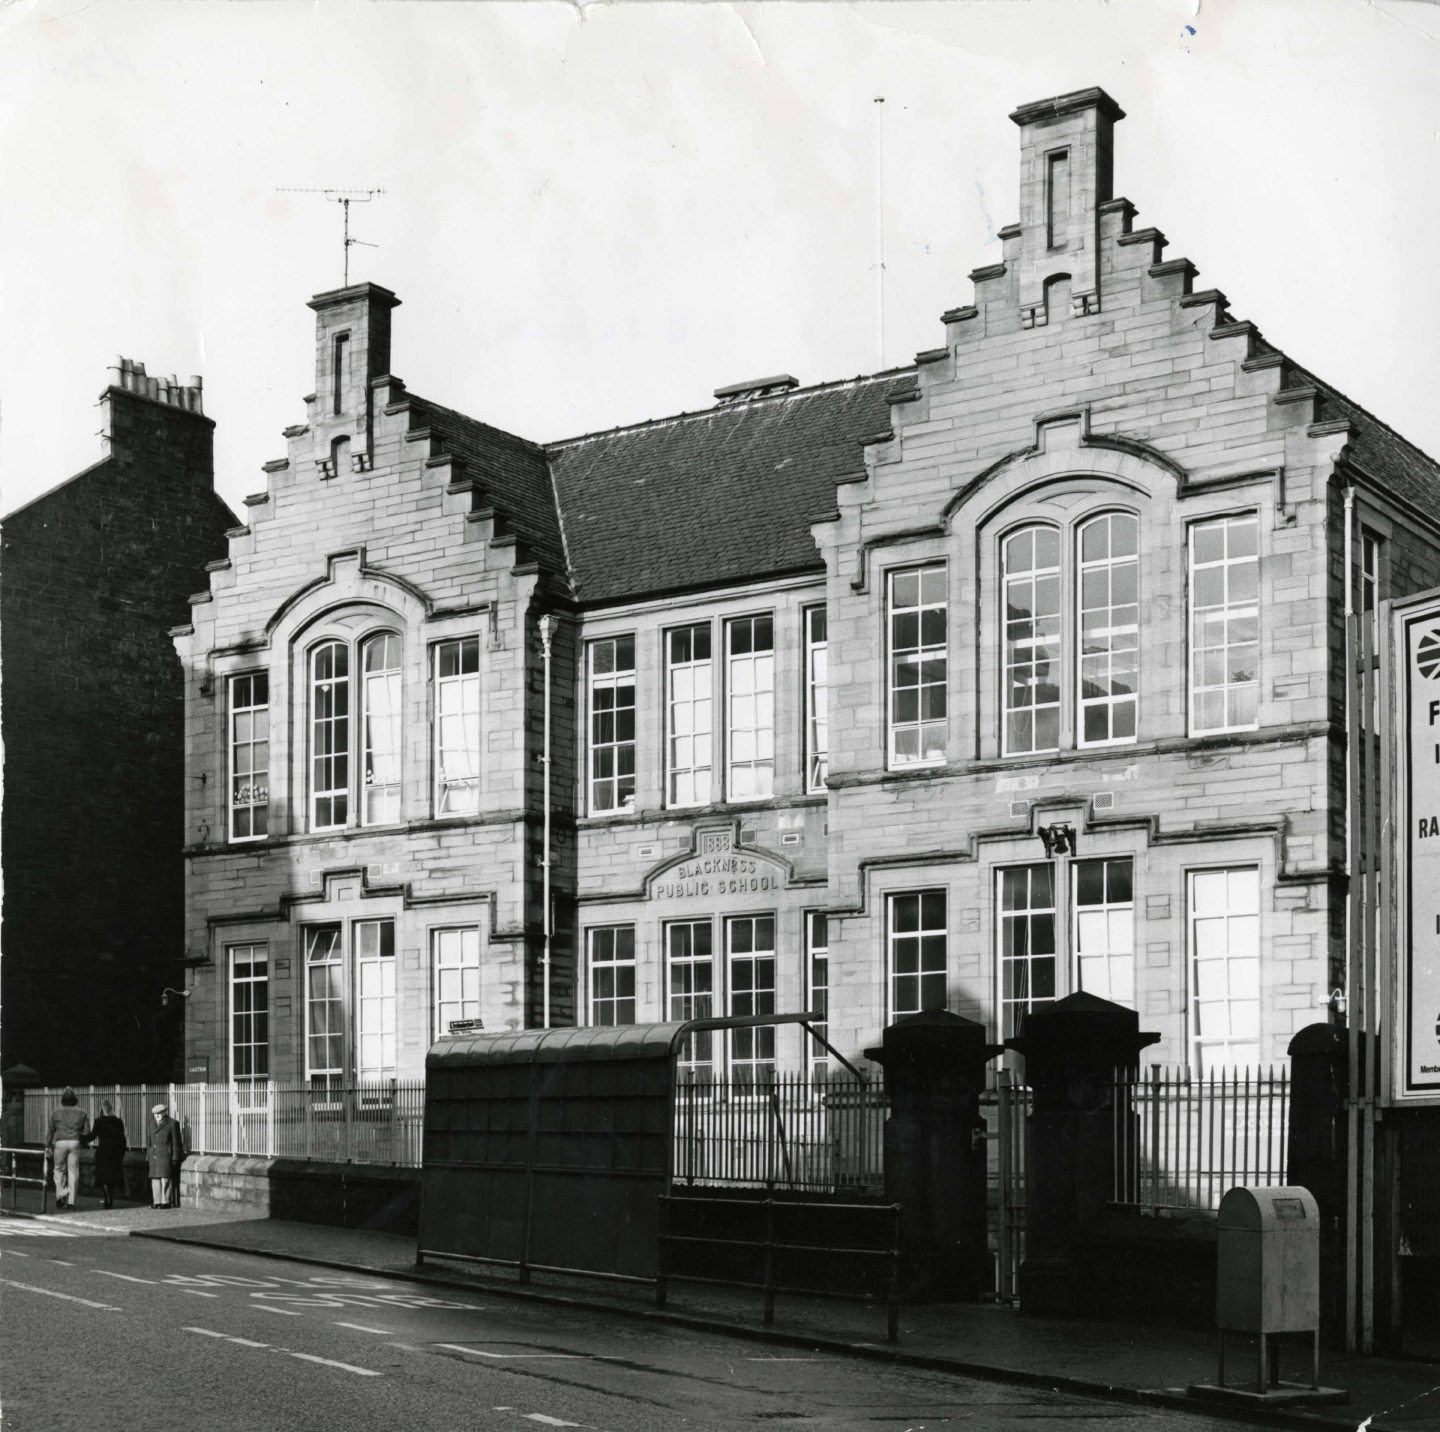 An exterior view of the Blackness Primary School building in Hawkhill, Dundee. February 7 1977. Image: DC Thomson.